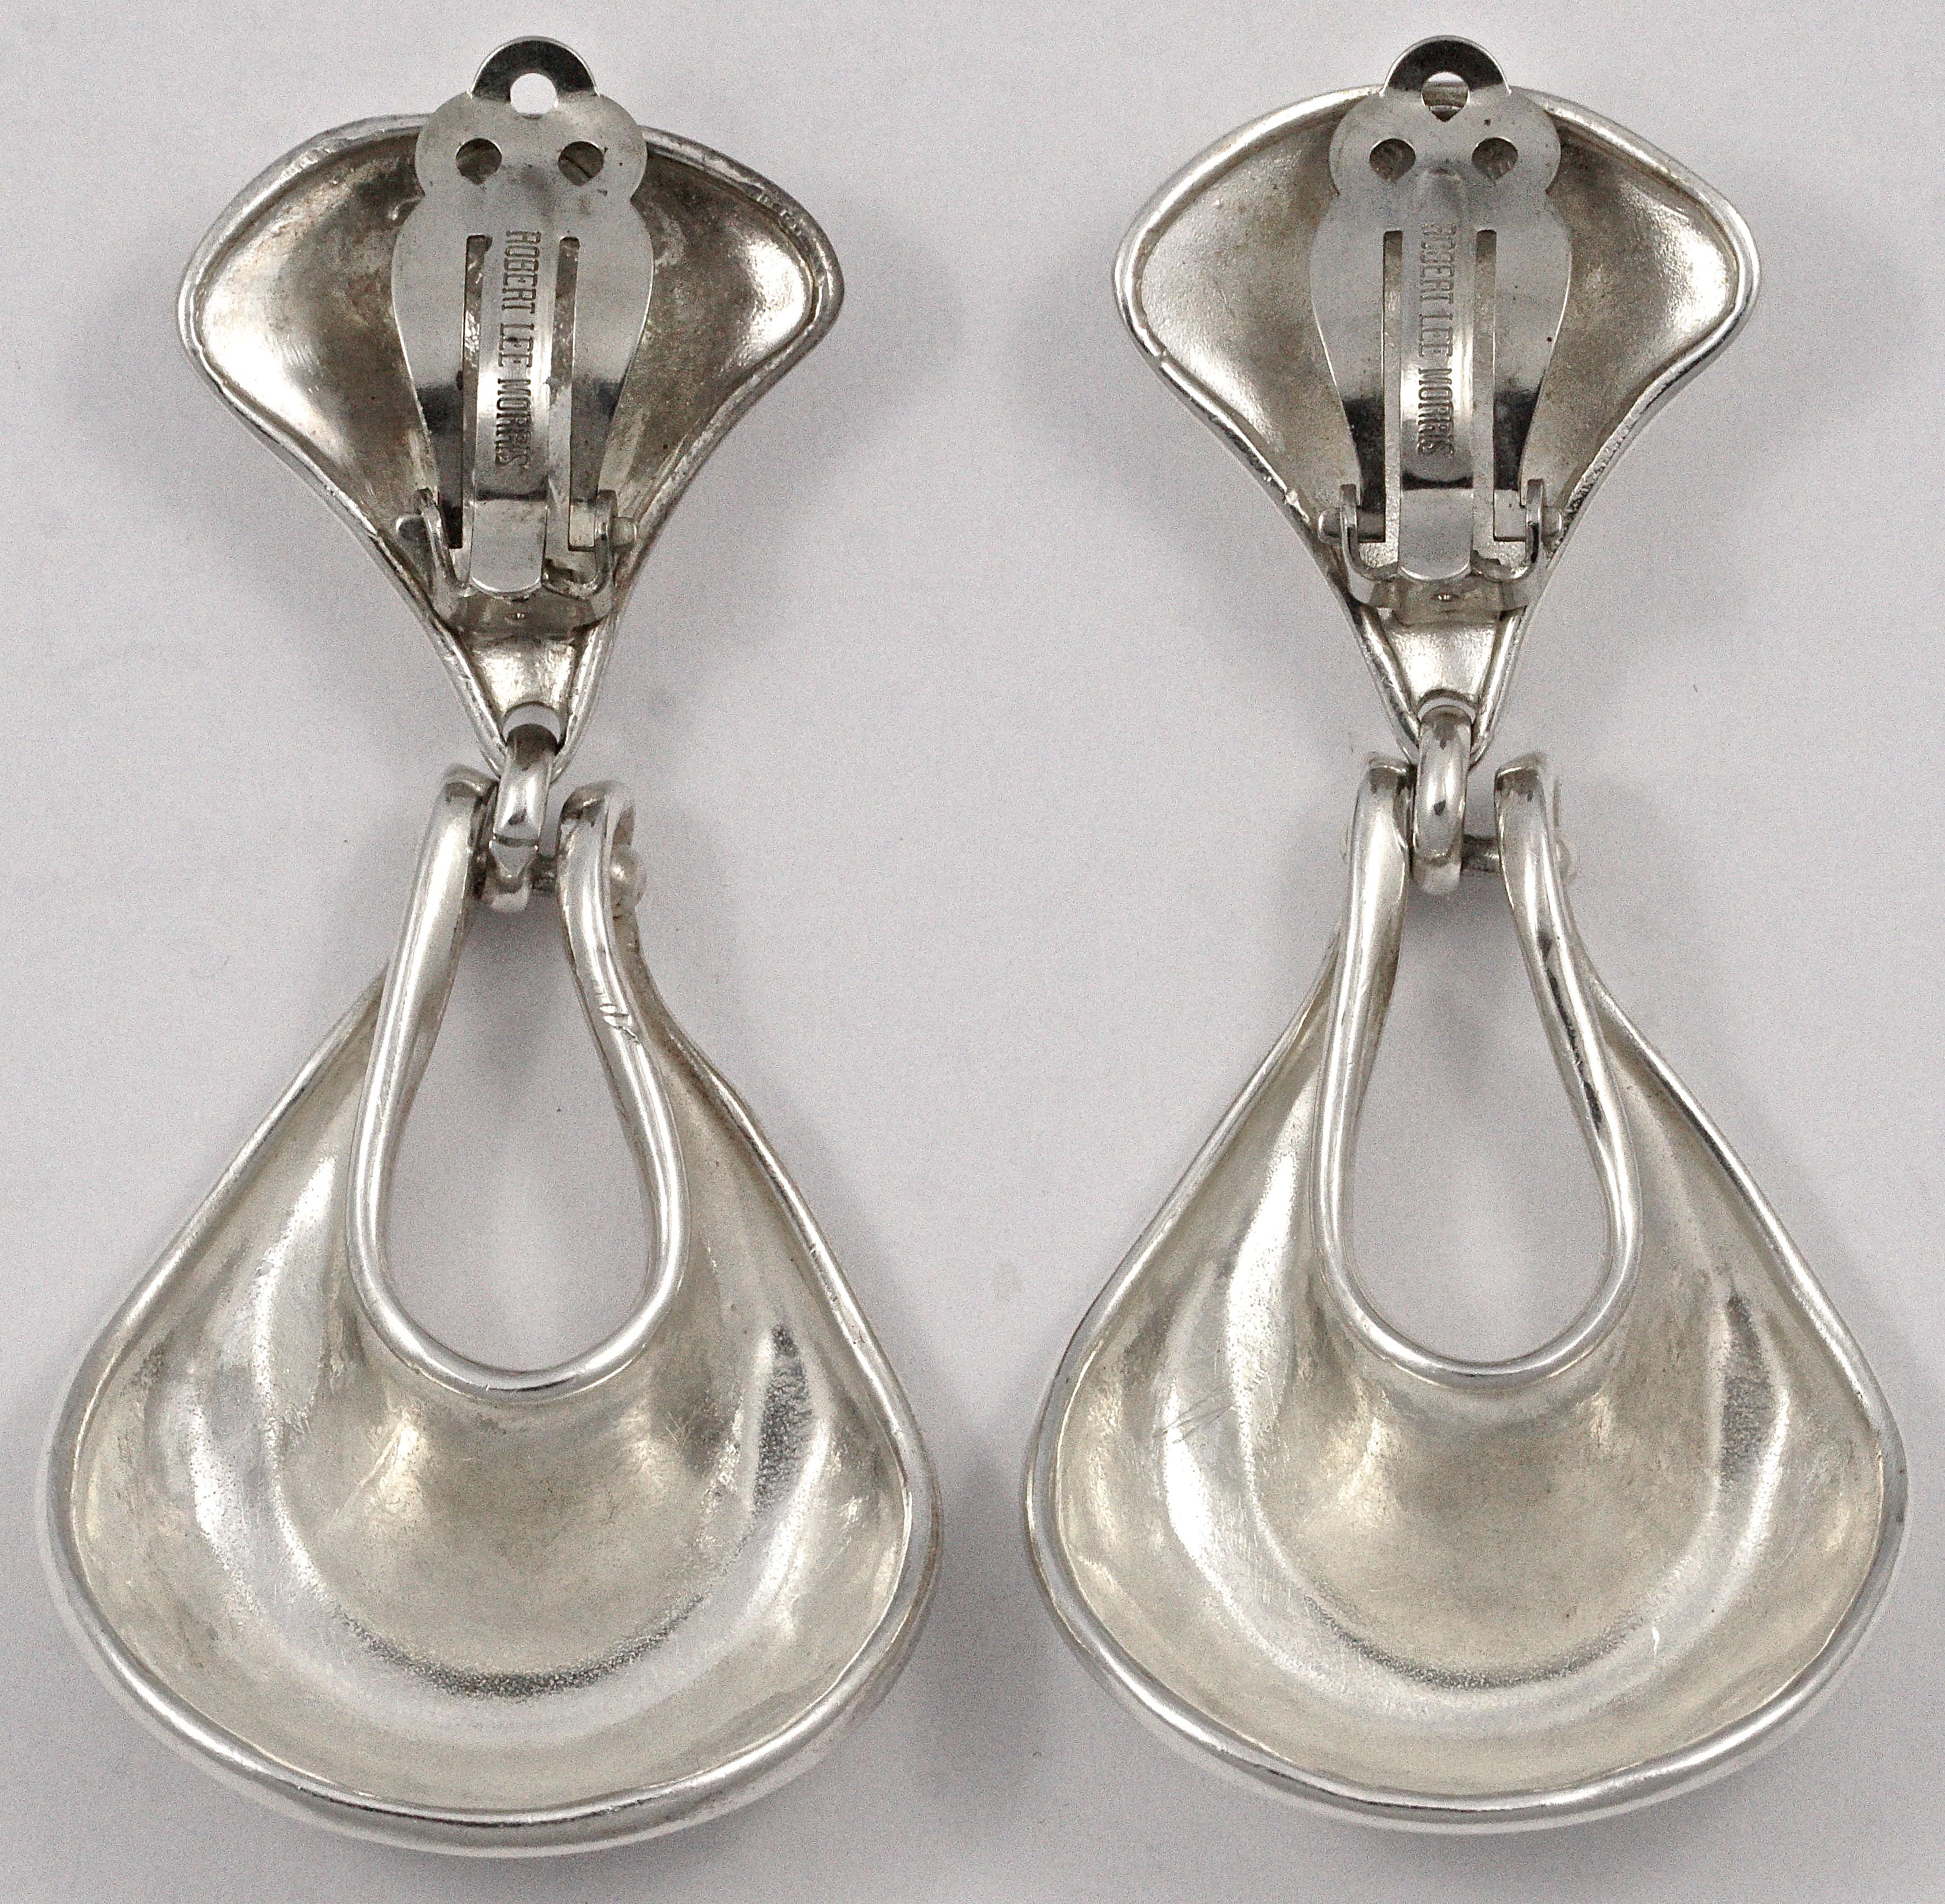 Lovely Robert Lee Morris silver clip on earrings, featuring an organic shaped drop hoop. They test for silver. Measuring drop 6.8cm / 2.67 inches by maximum width 3.2cm / 1.26 inches. They are in very good condition, with surface scratching as